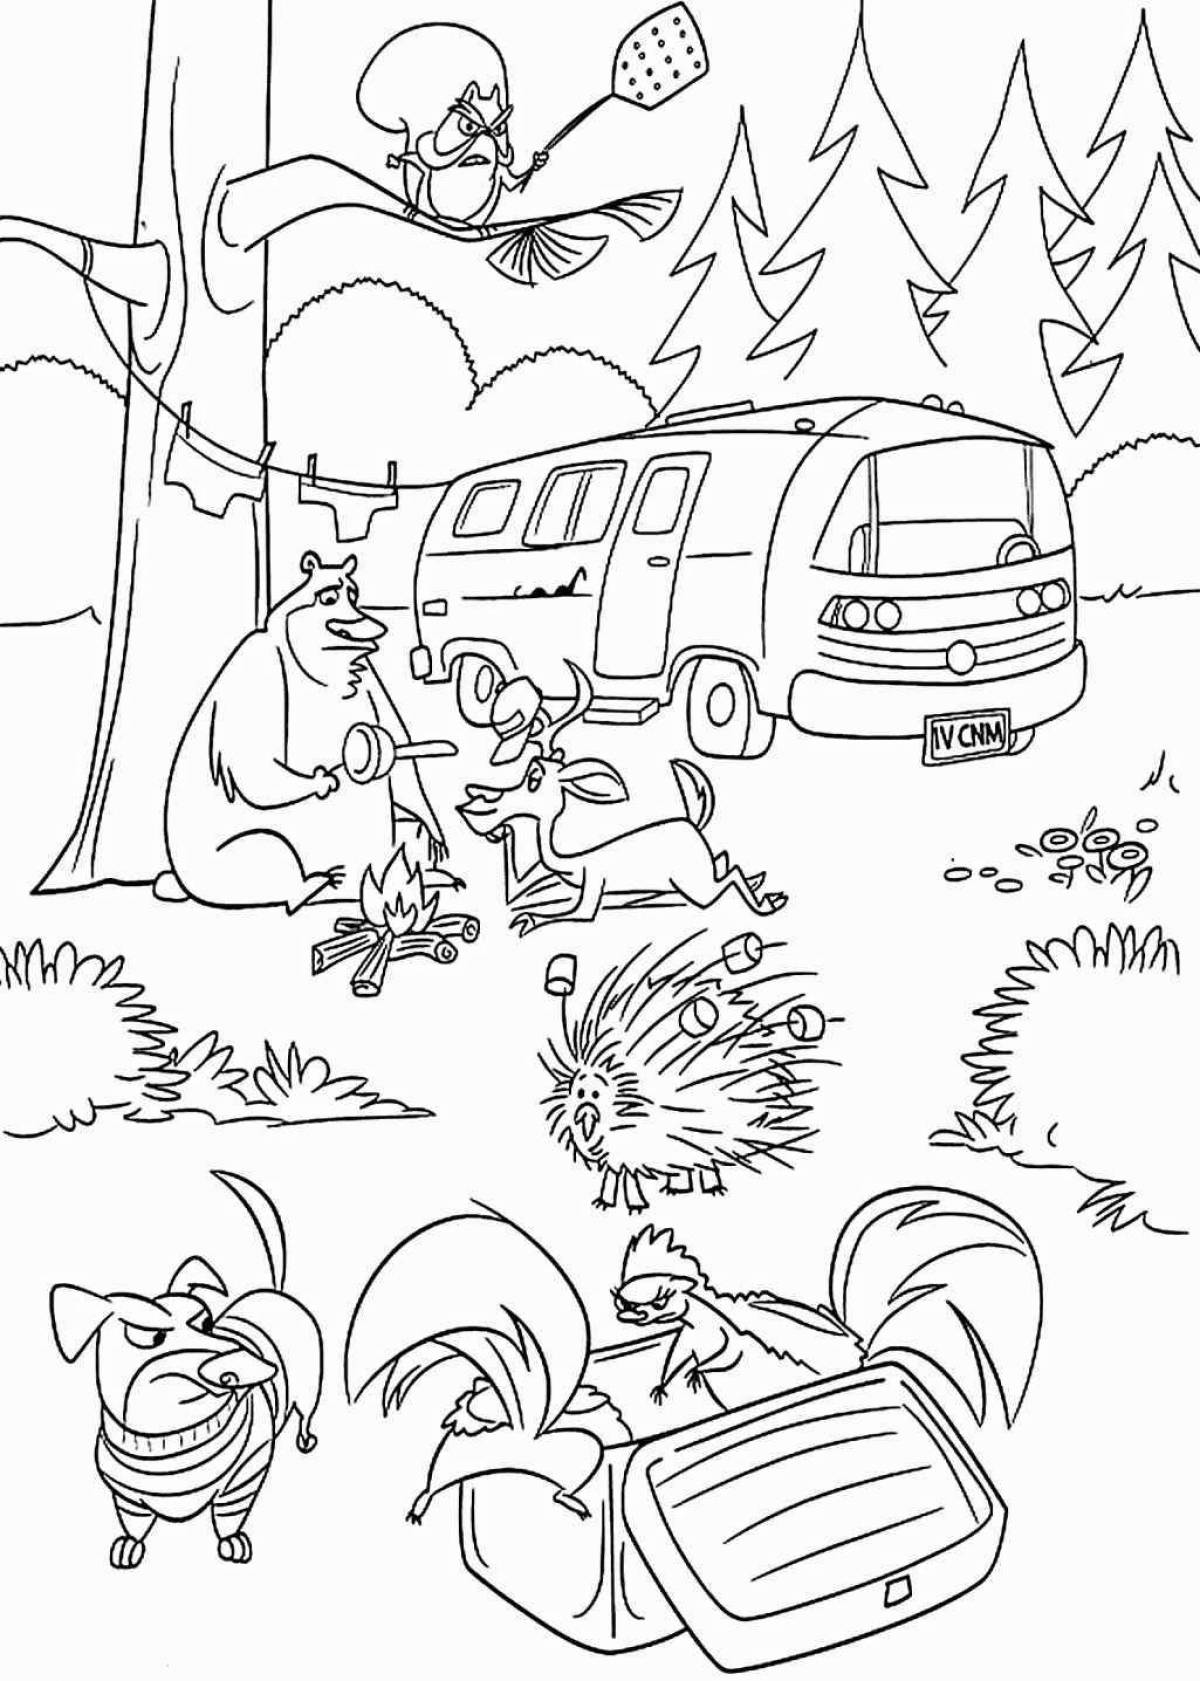 Coloring page amazing animal care